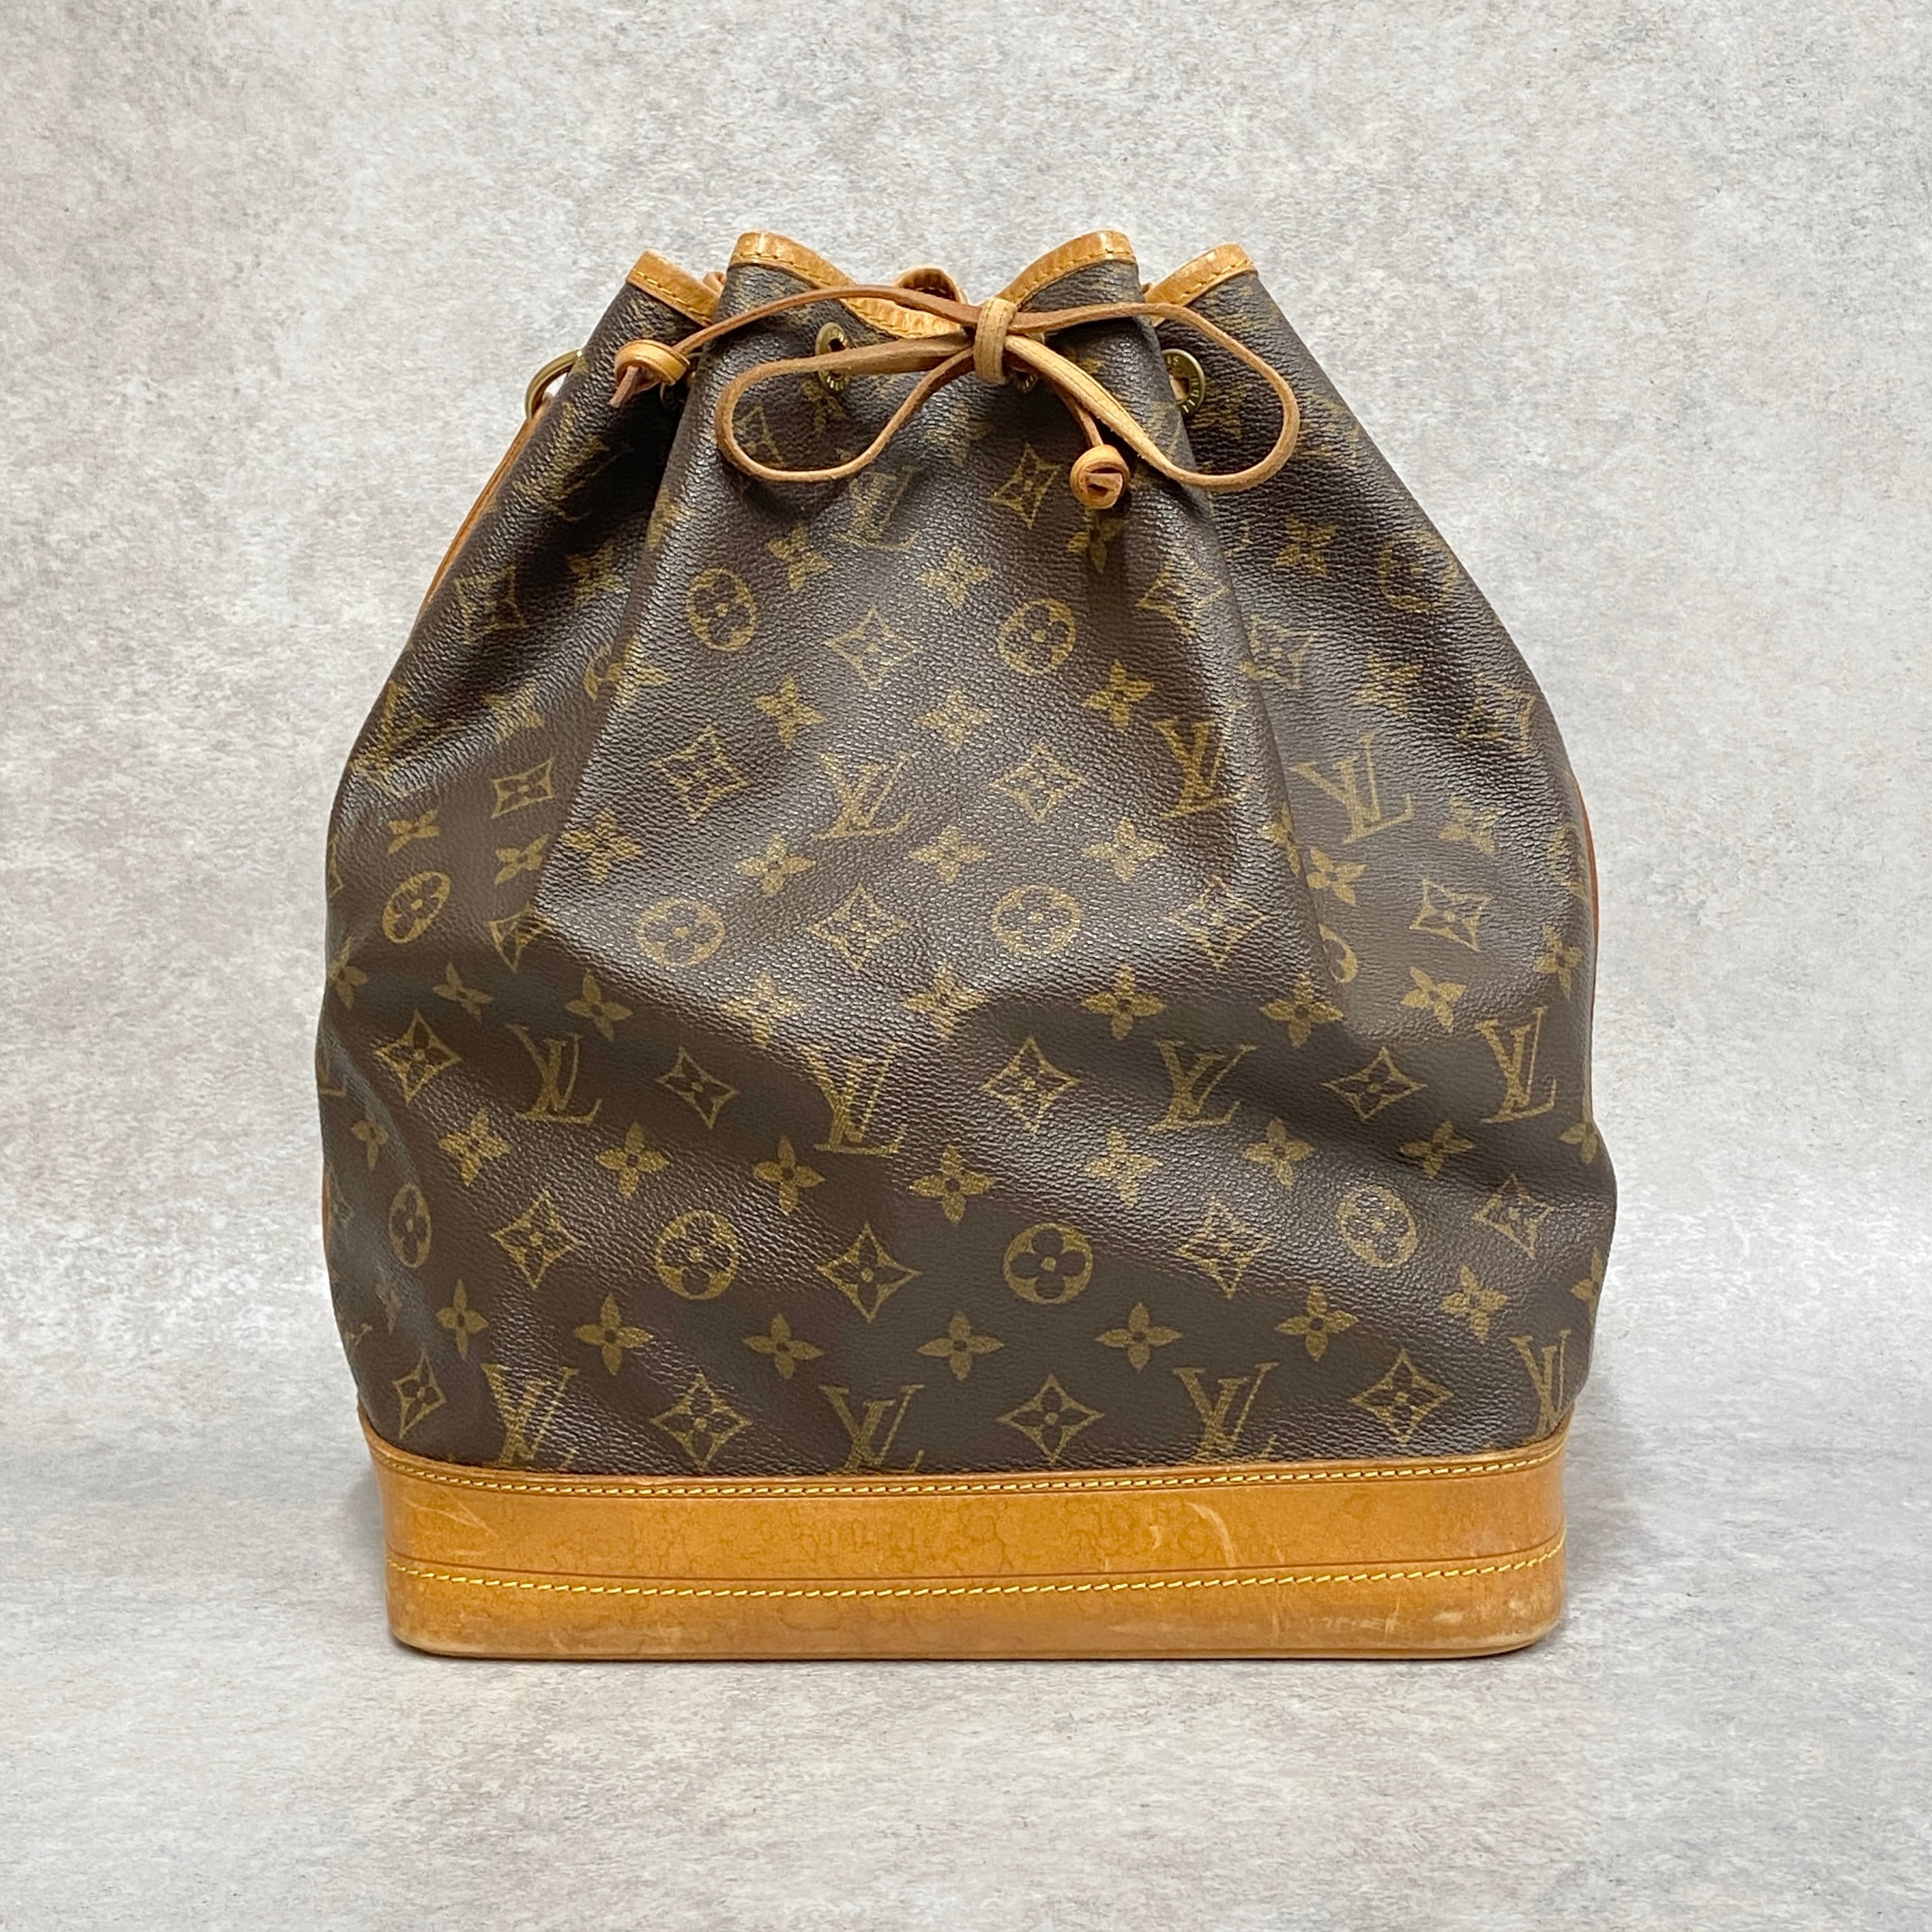 LOUIS VUITTON ルイ・ヴィトン モノグラム ノエ 巾着ショルダーバッグ 6713-202204 | rean powered by BASE